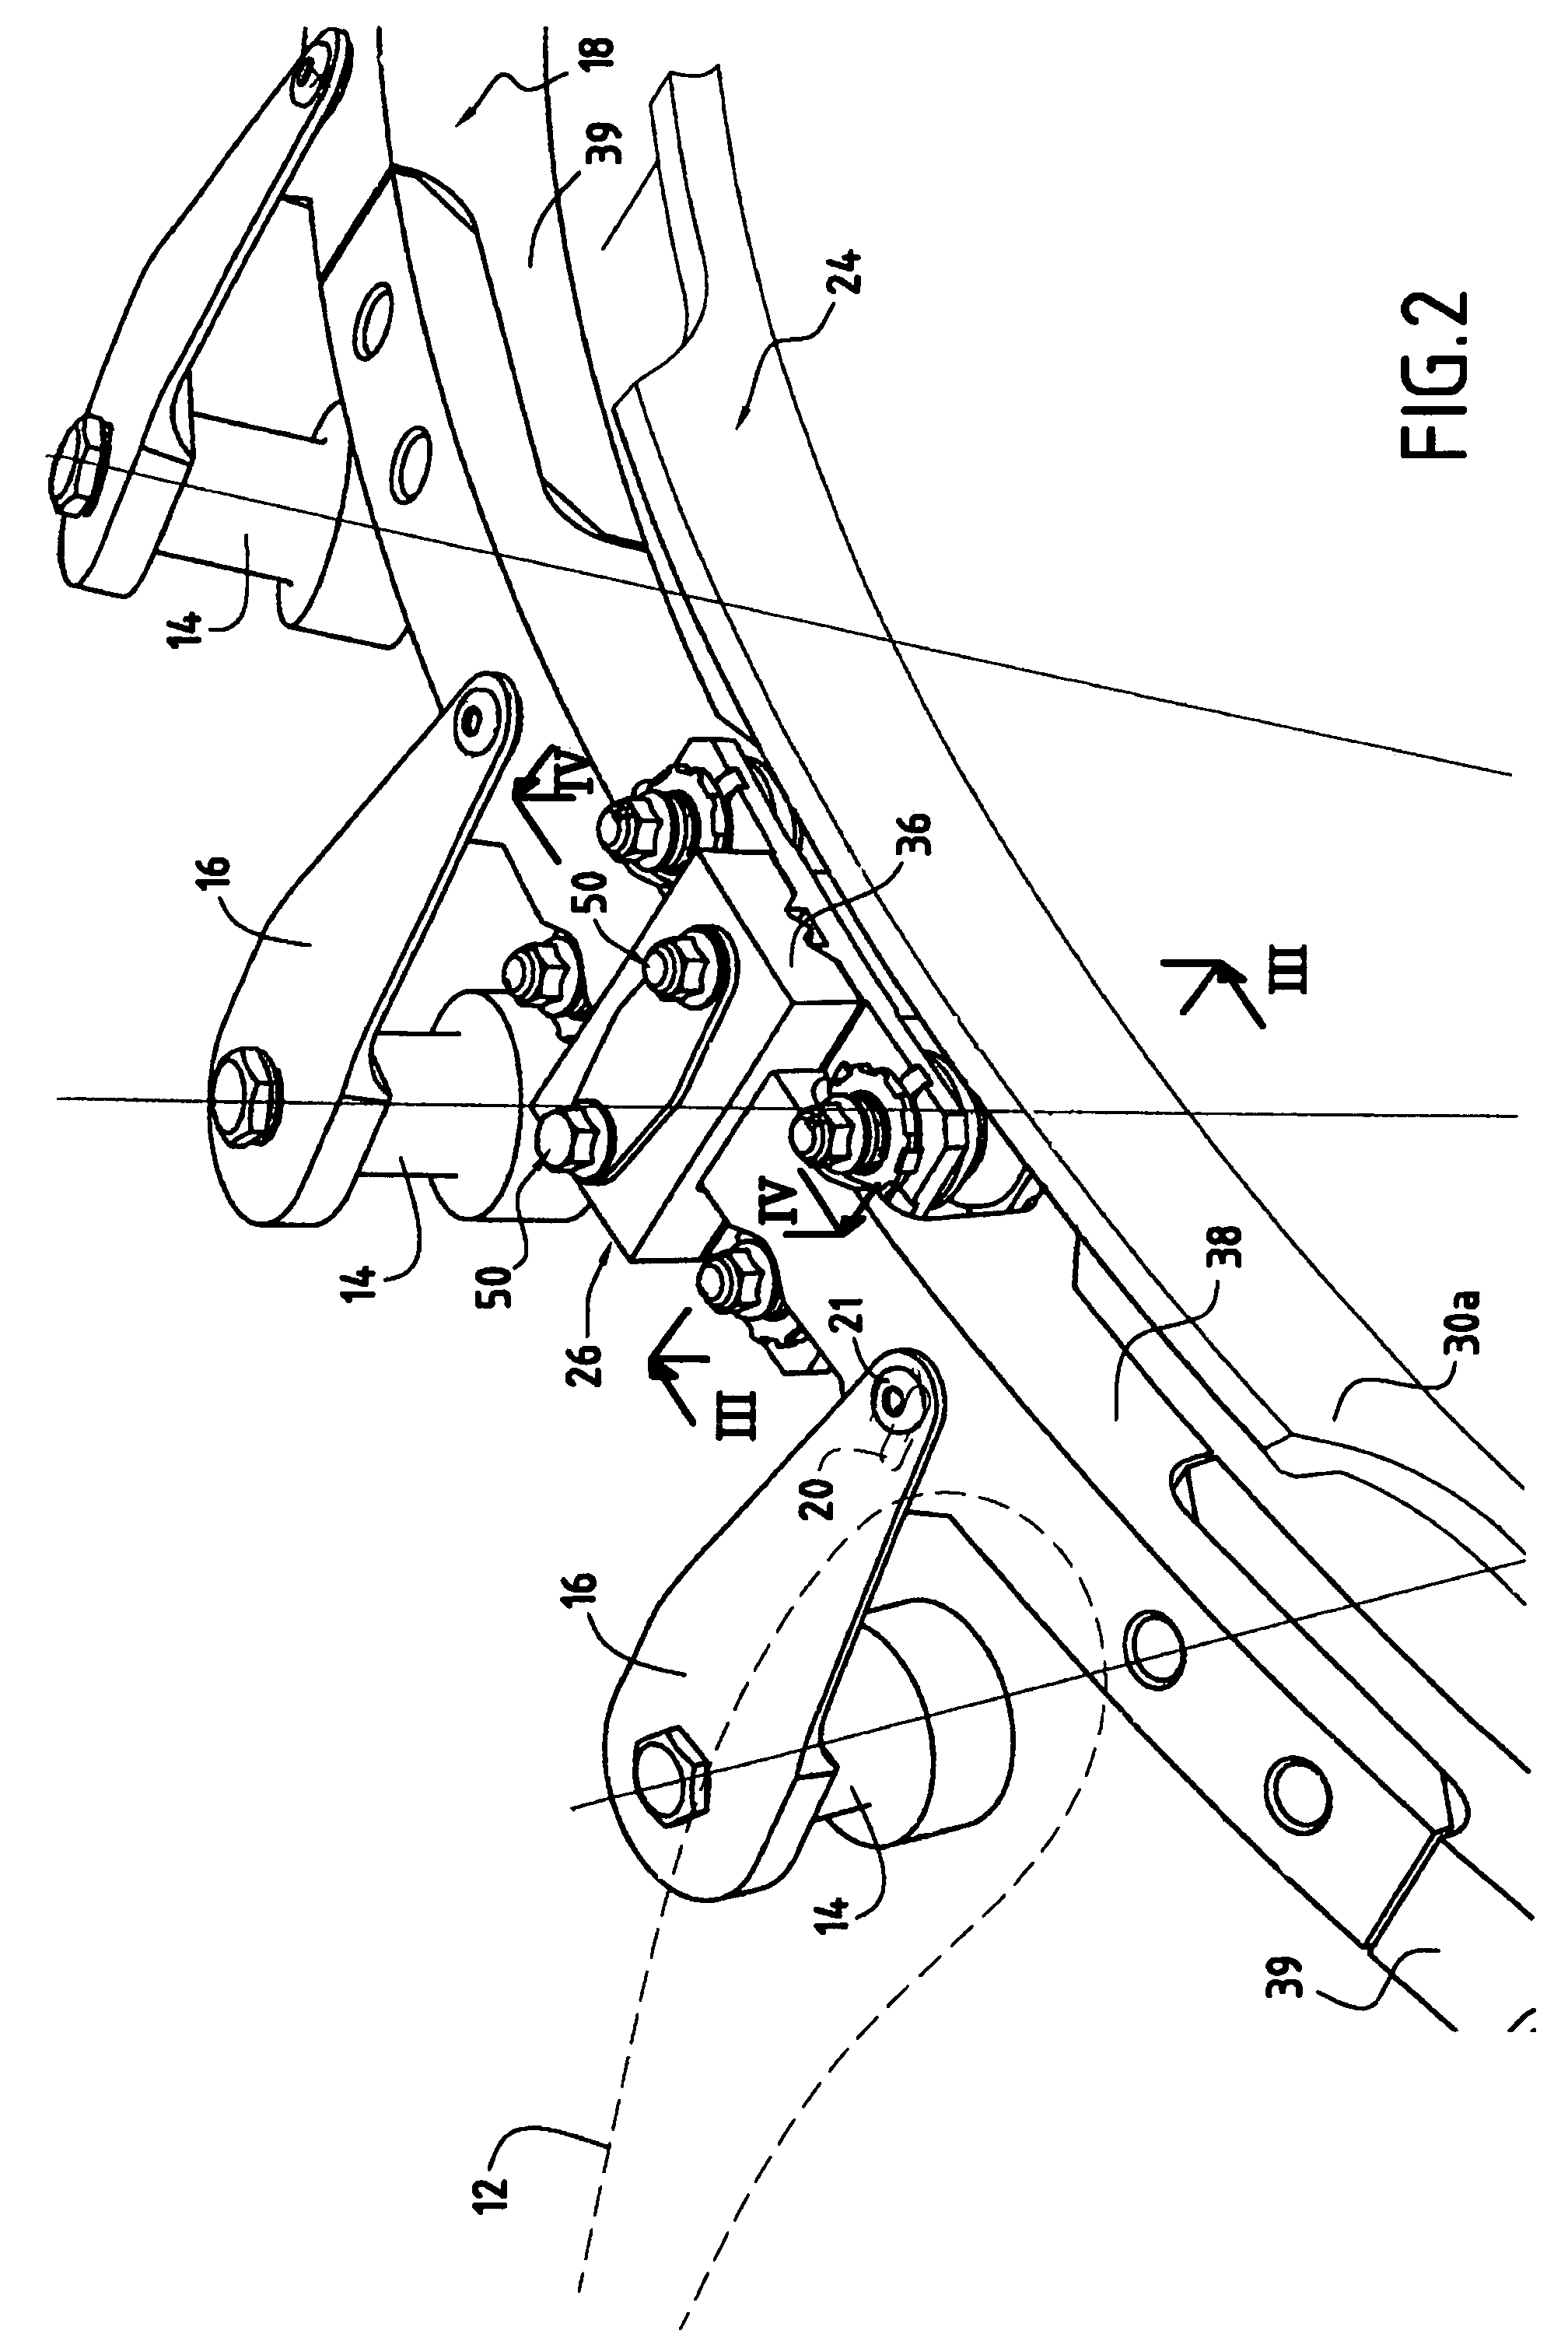 Stator vane stage actuated by an automatically-centering rotary actuator ring